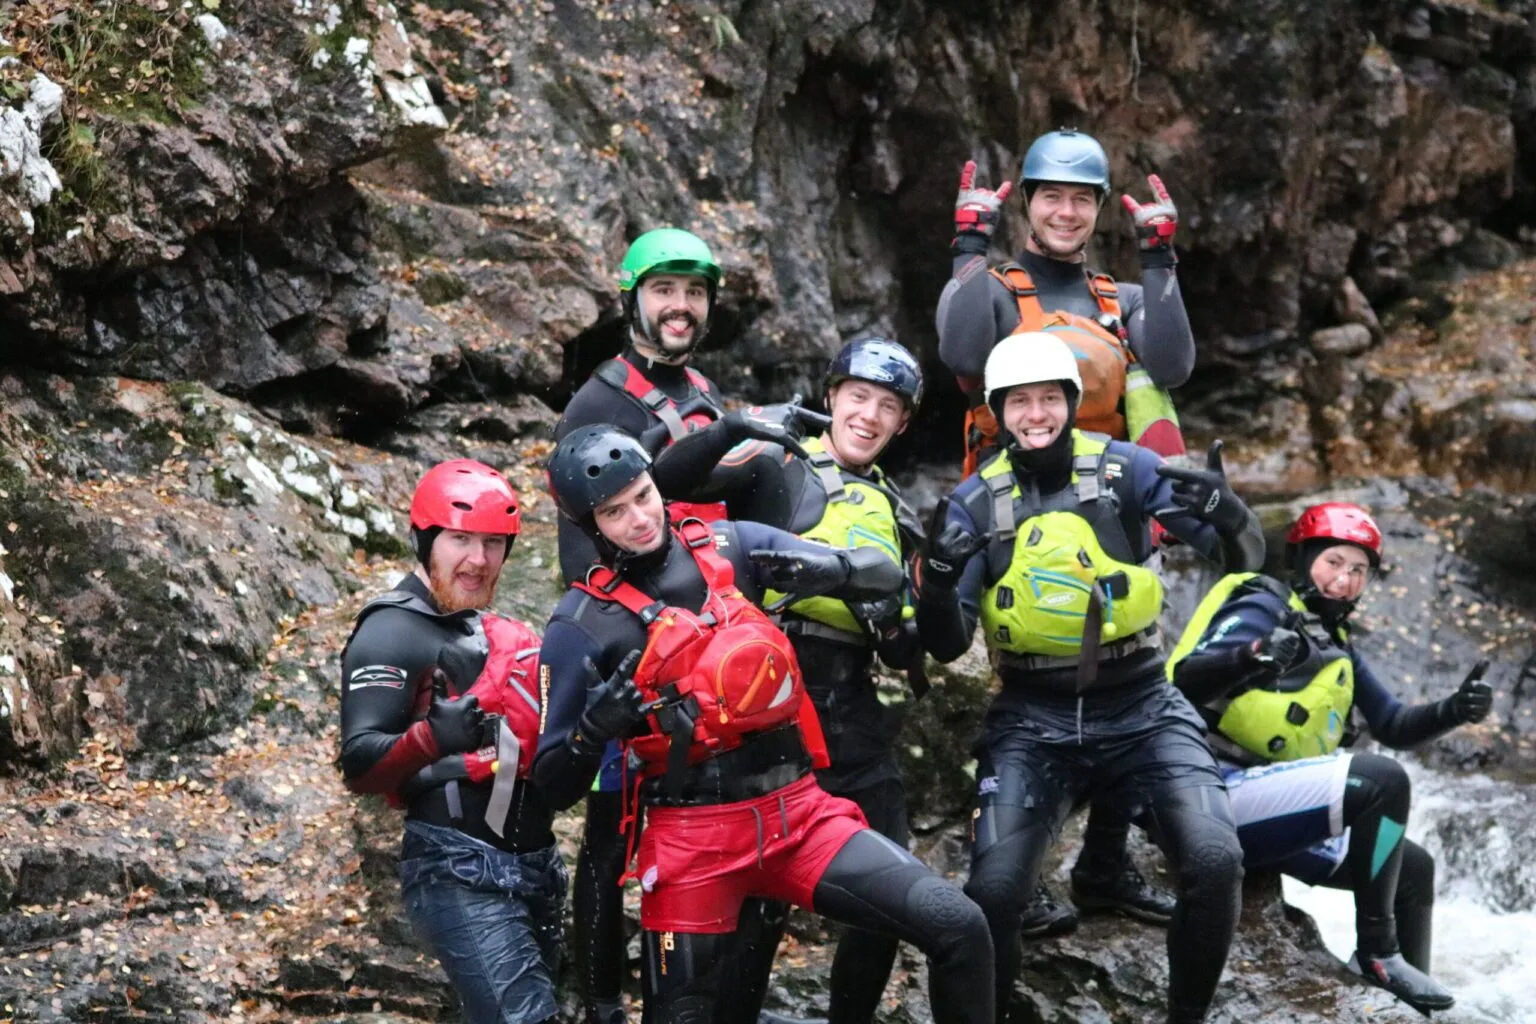 A group of people taking part in an outdoor instructor training course, wearing safety gear, standing on rocks by a river,